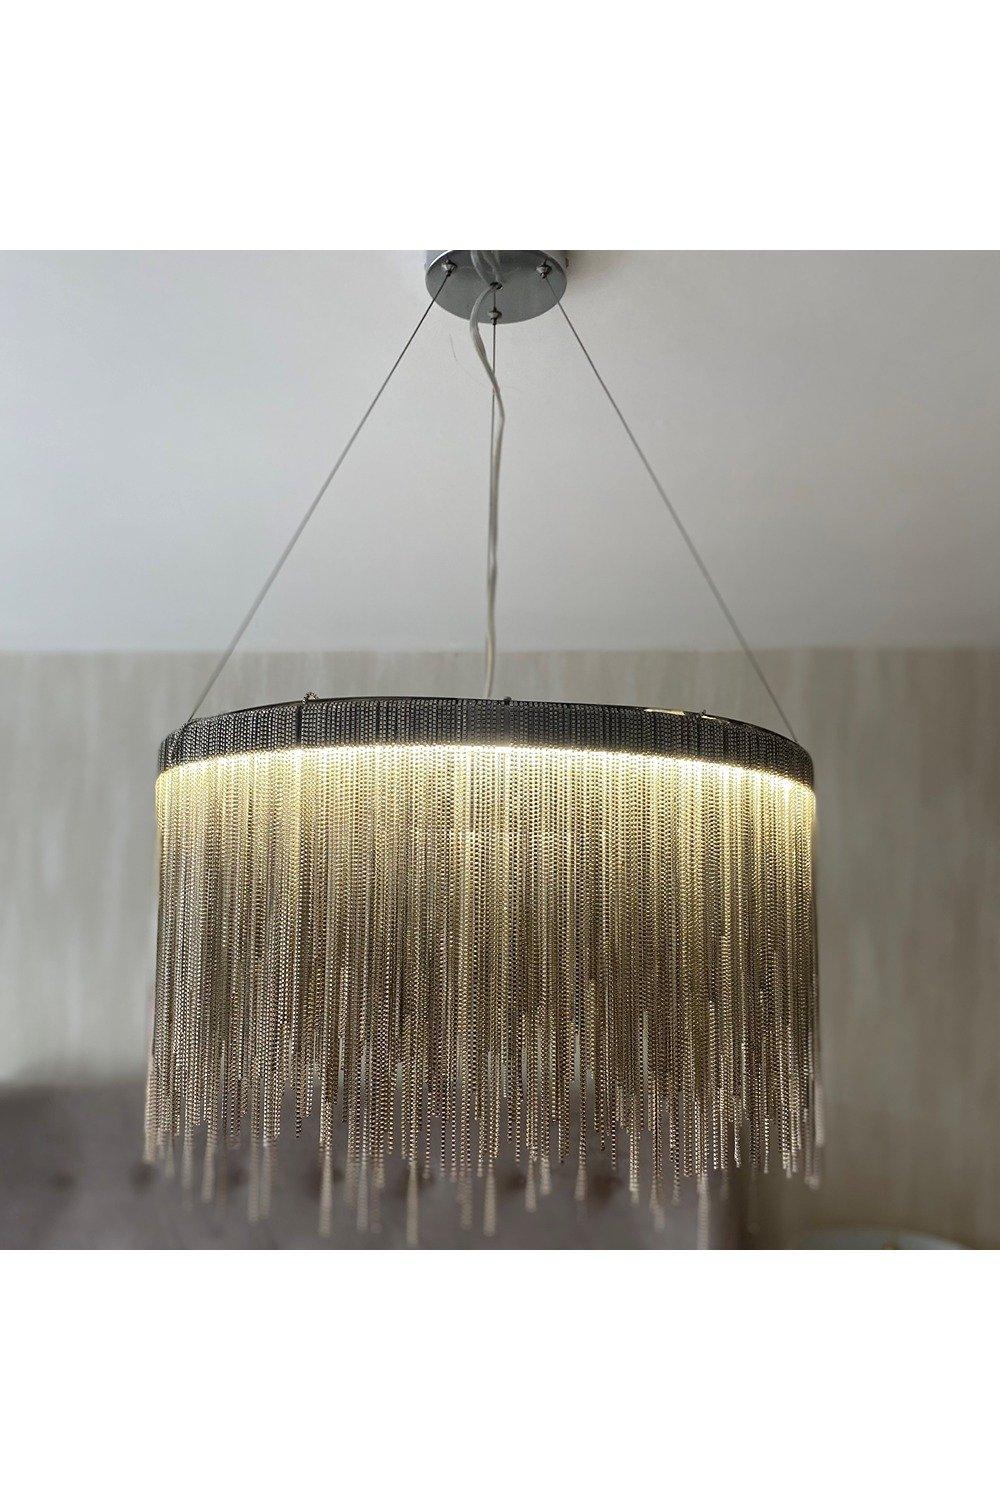 Holland Silver Chain Waterfall LED Ceiling Light